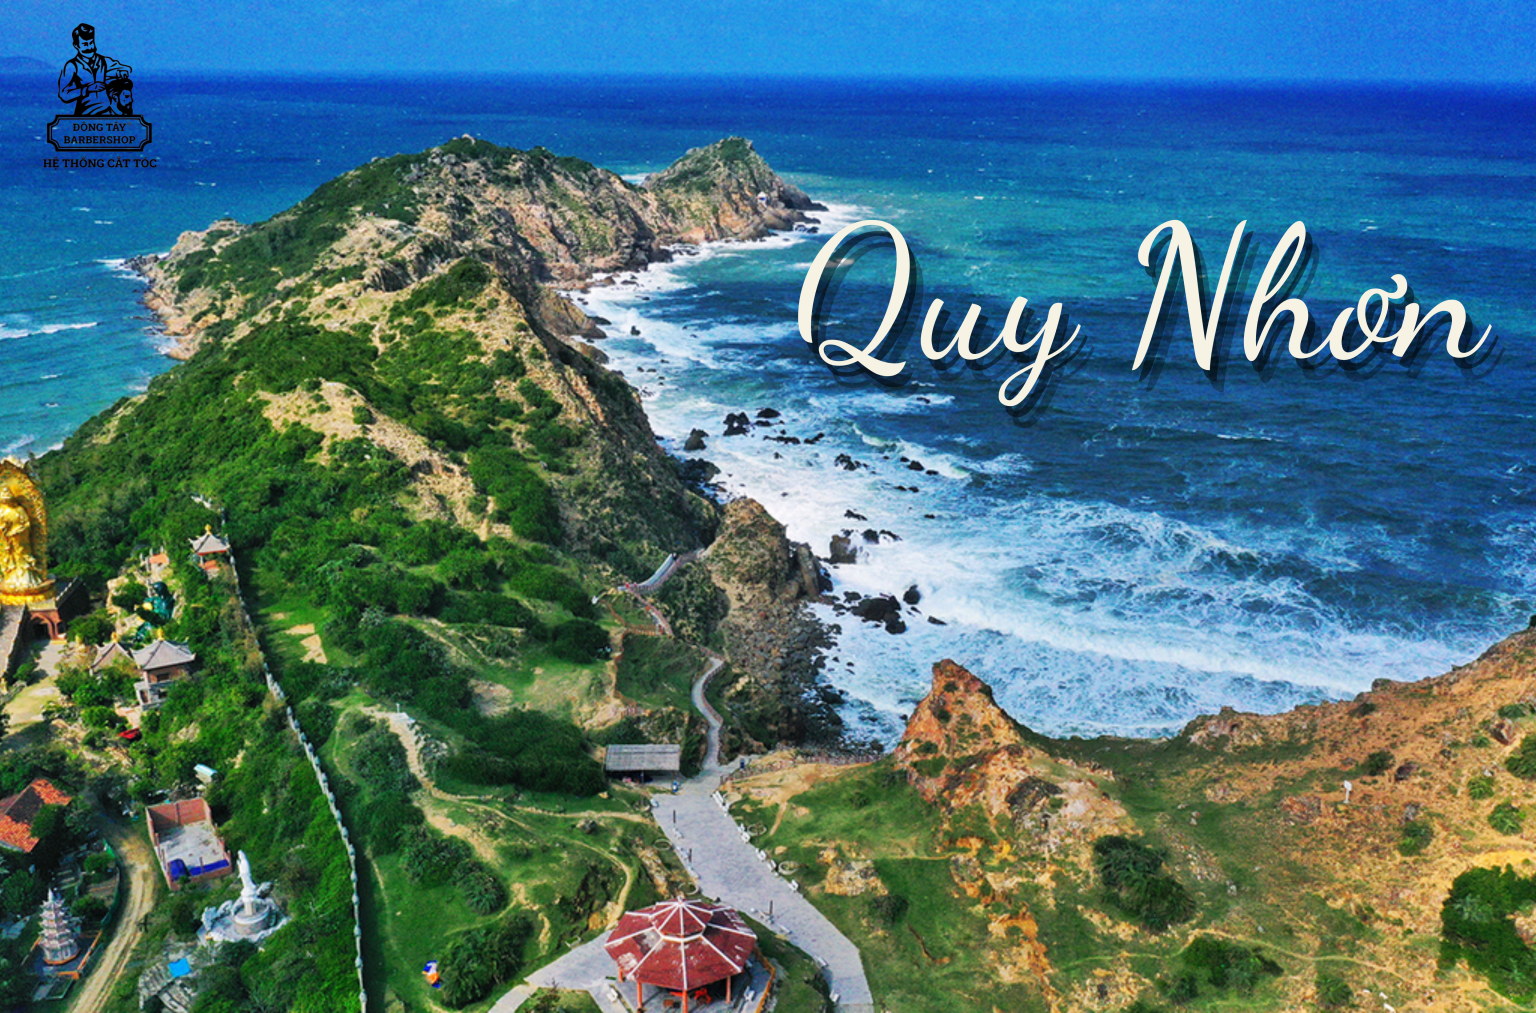 Explore the Captivating Attractions of Quy Nhon City - A Gem of Tourism